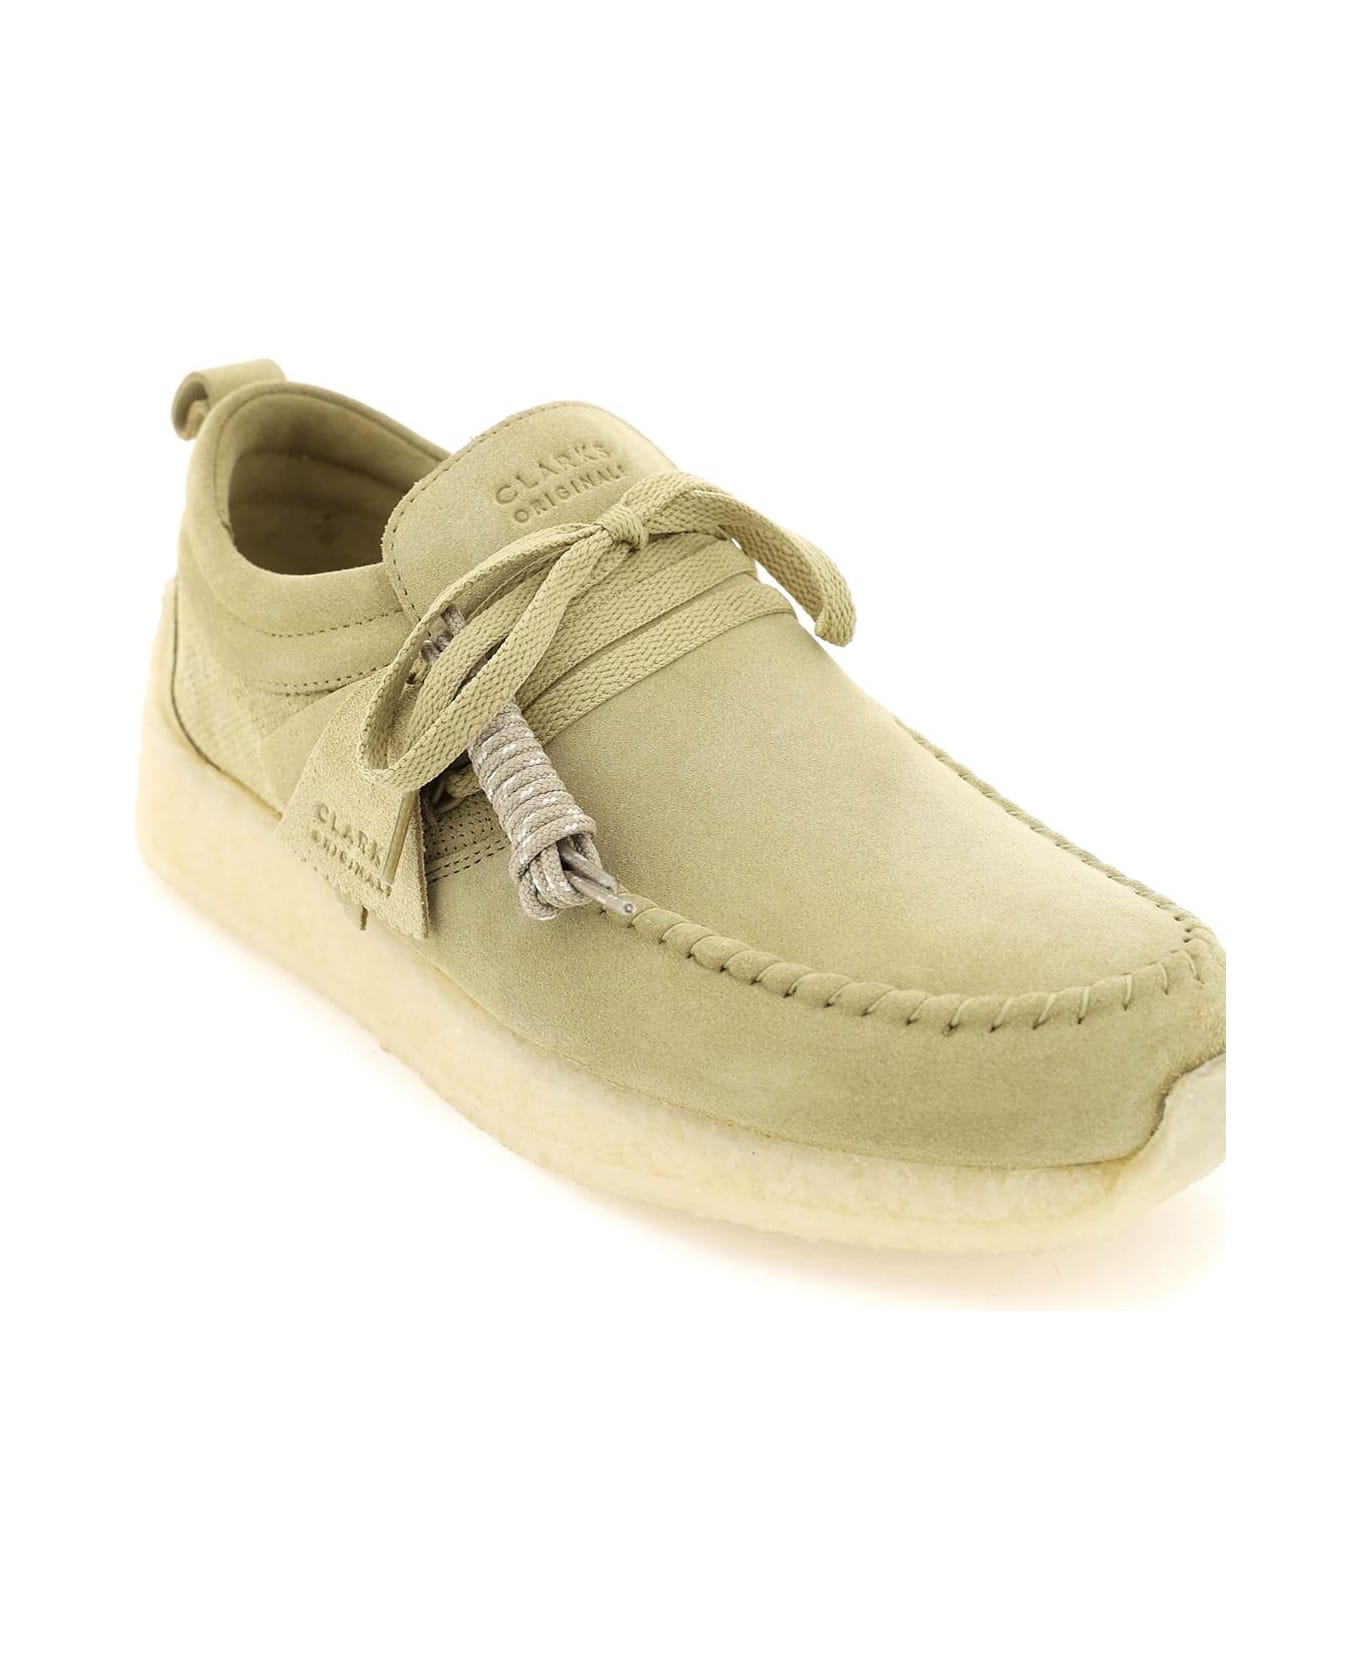 Clarks 'maycliffe' Lace-up Shoes - MAPLE (Beige) レースアップシューズ